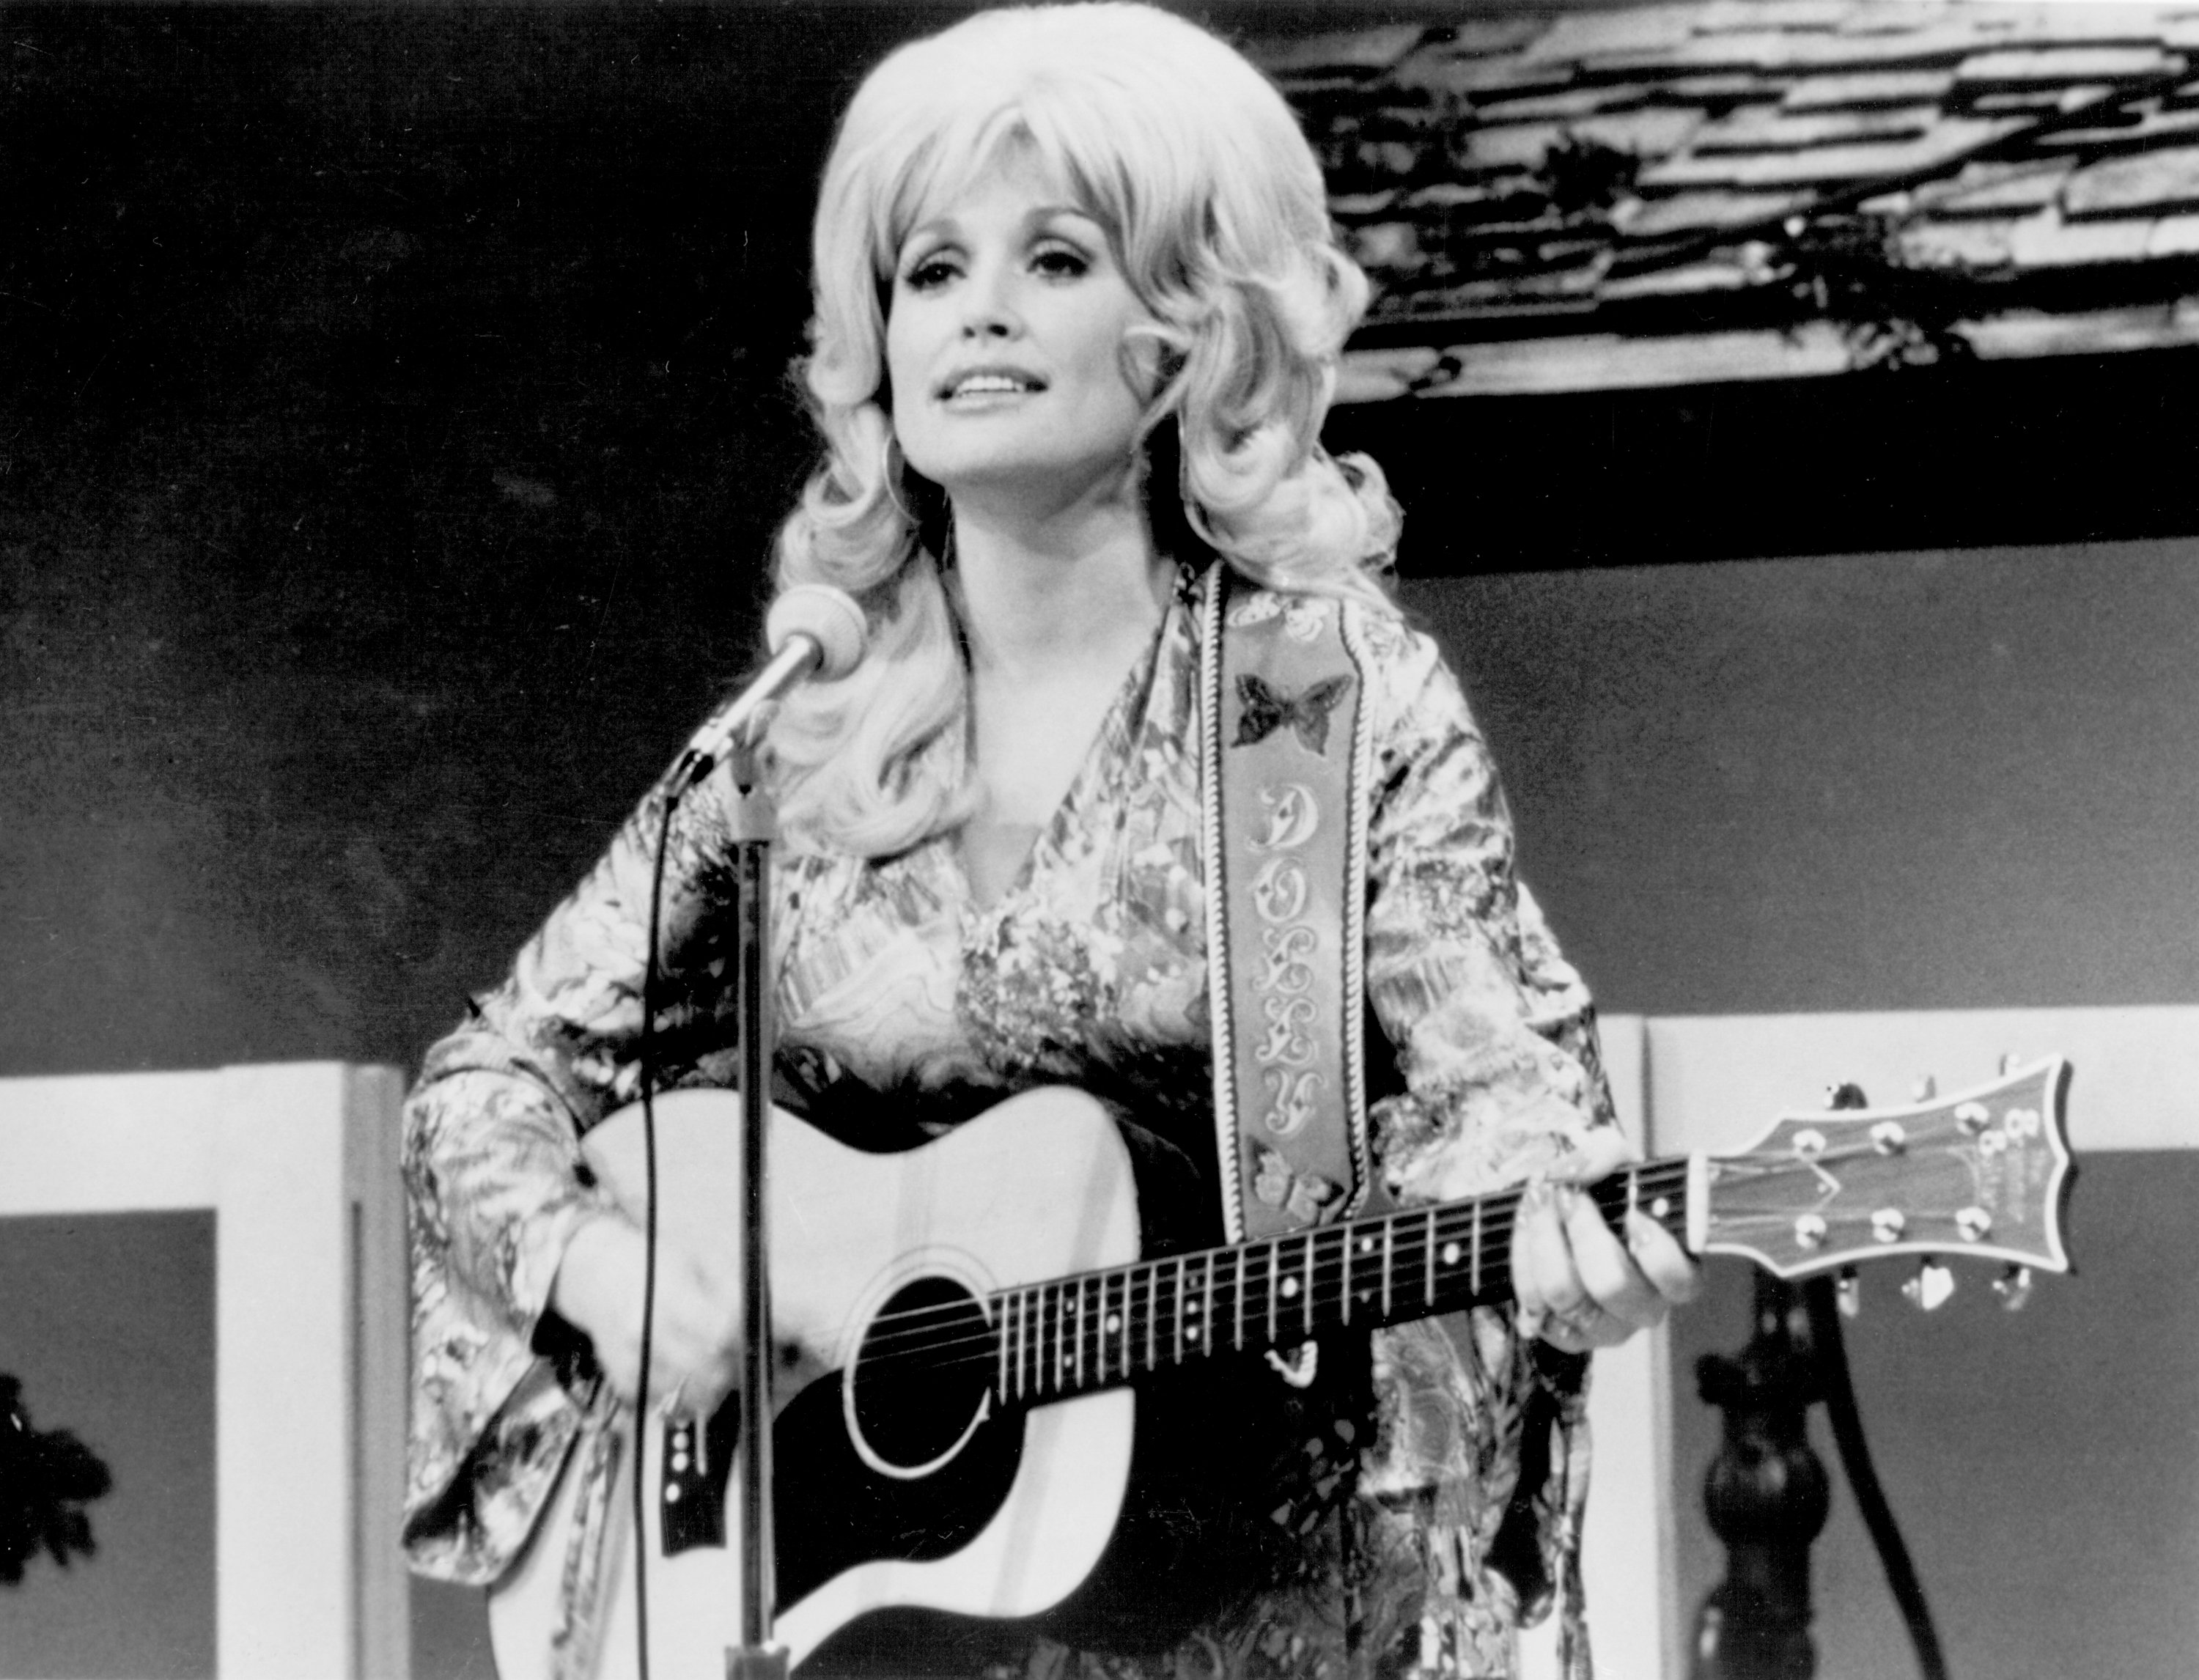 Country singer Dolly Parton performs onstage with an acoustic guitar in 1974.